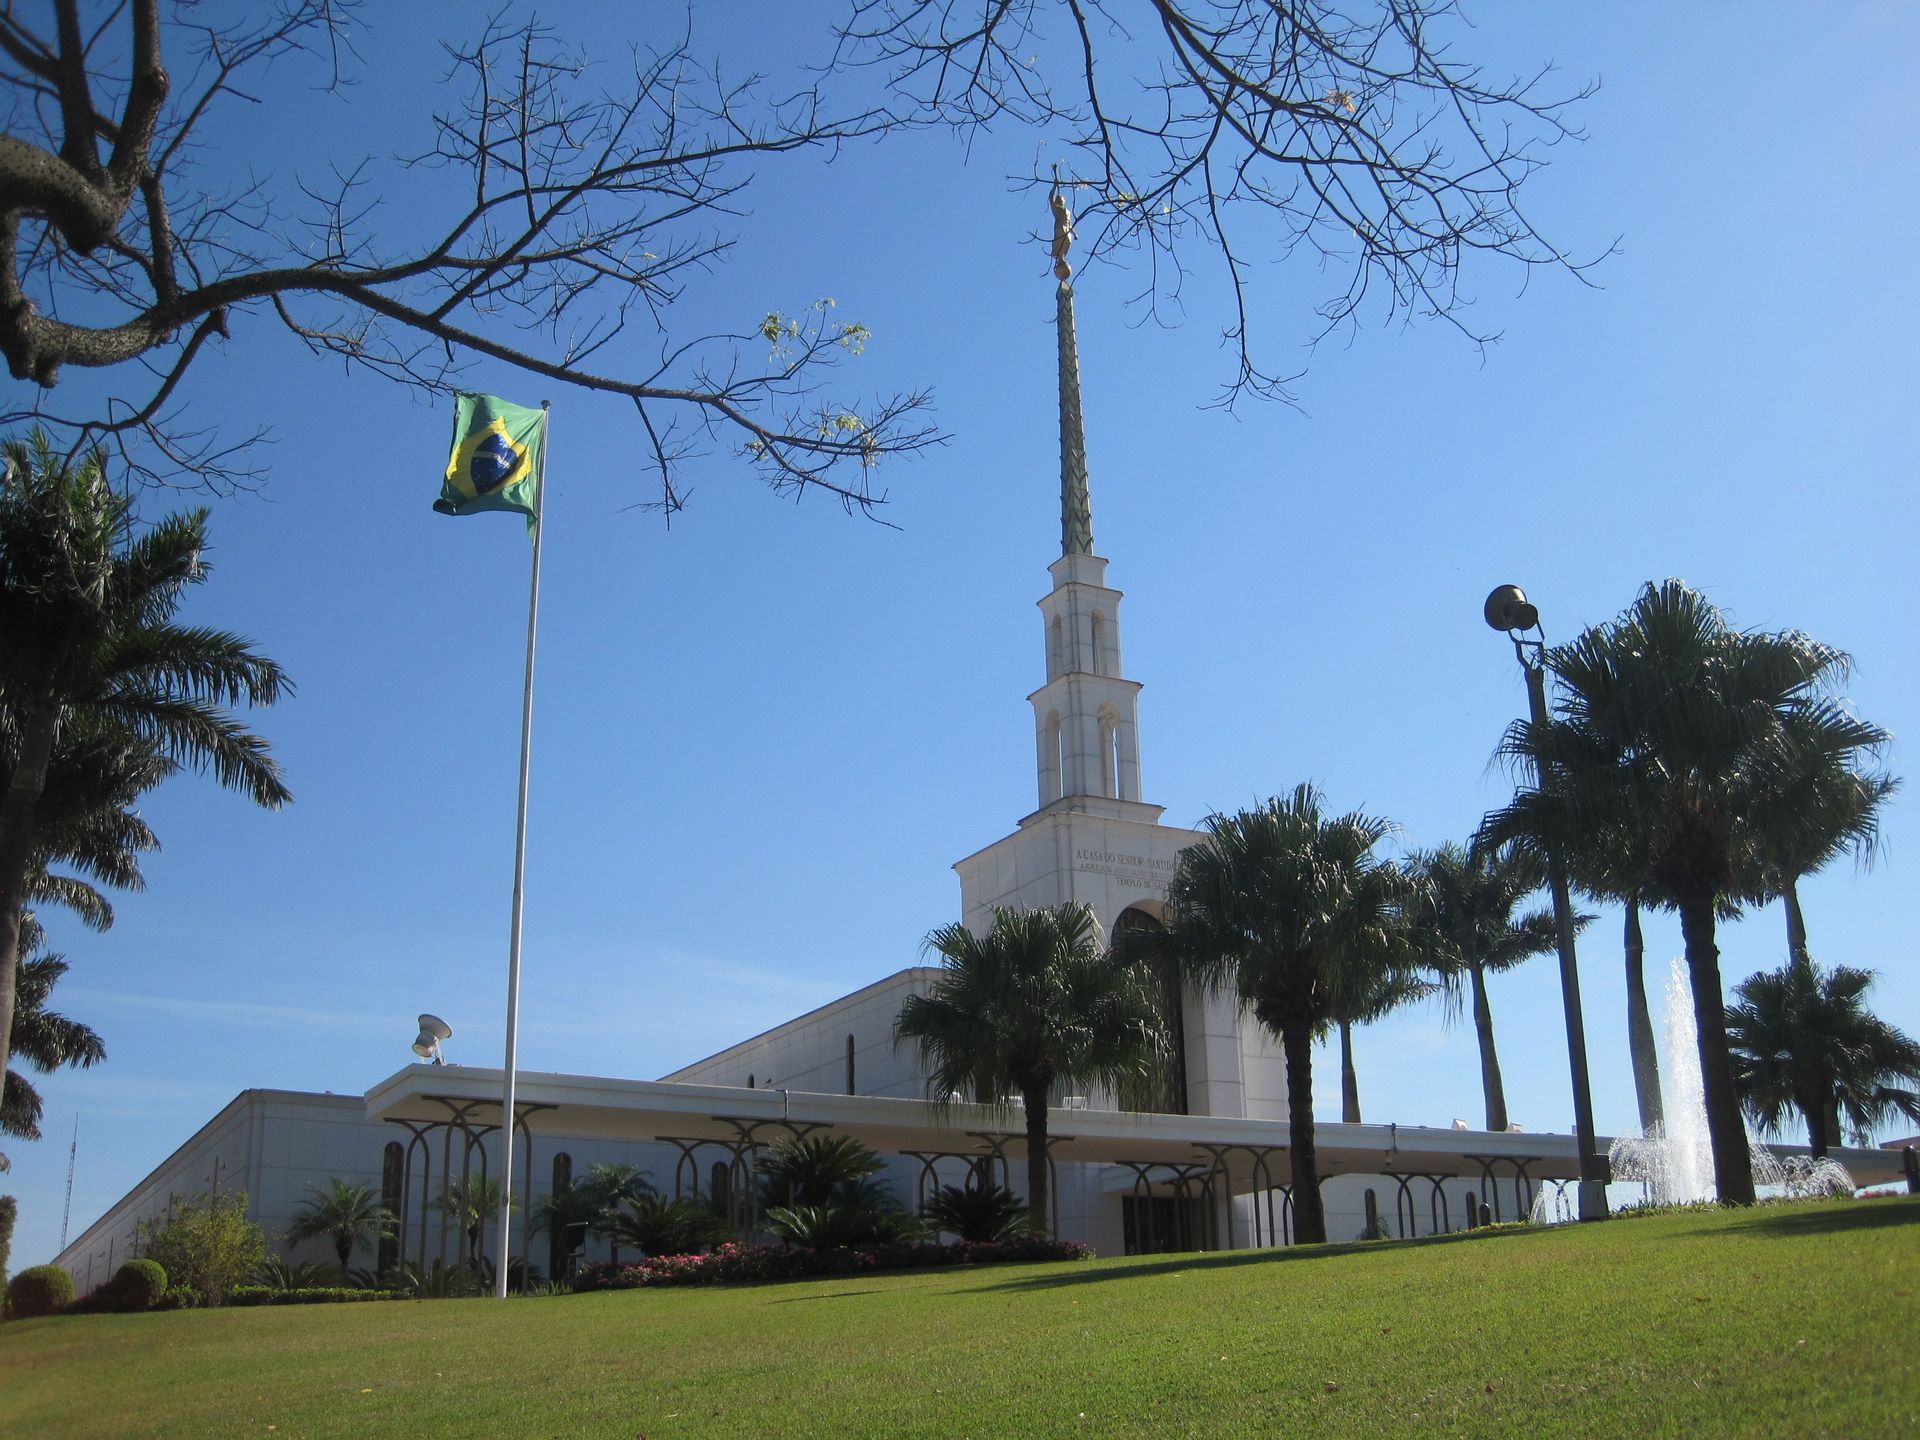 The São Paulo Brazil Temple side view, including the entrance and scenery.